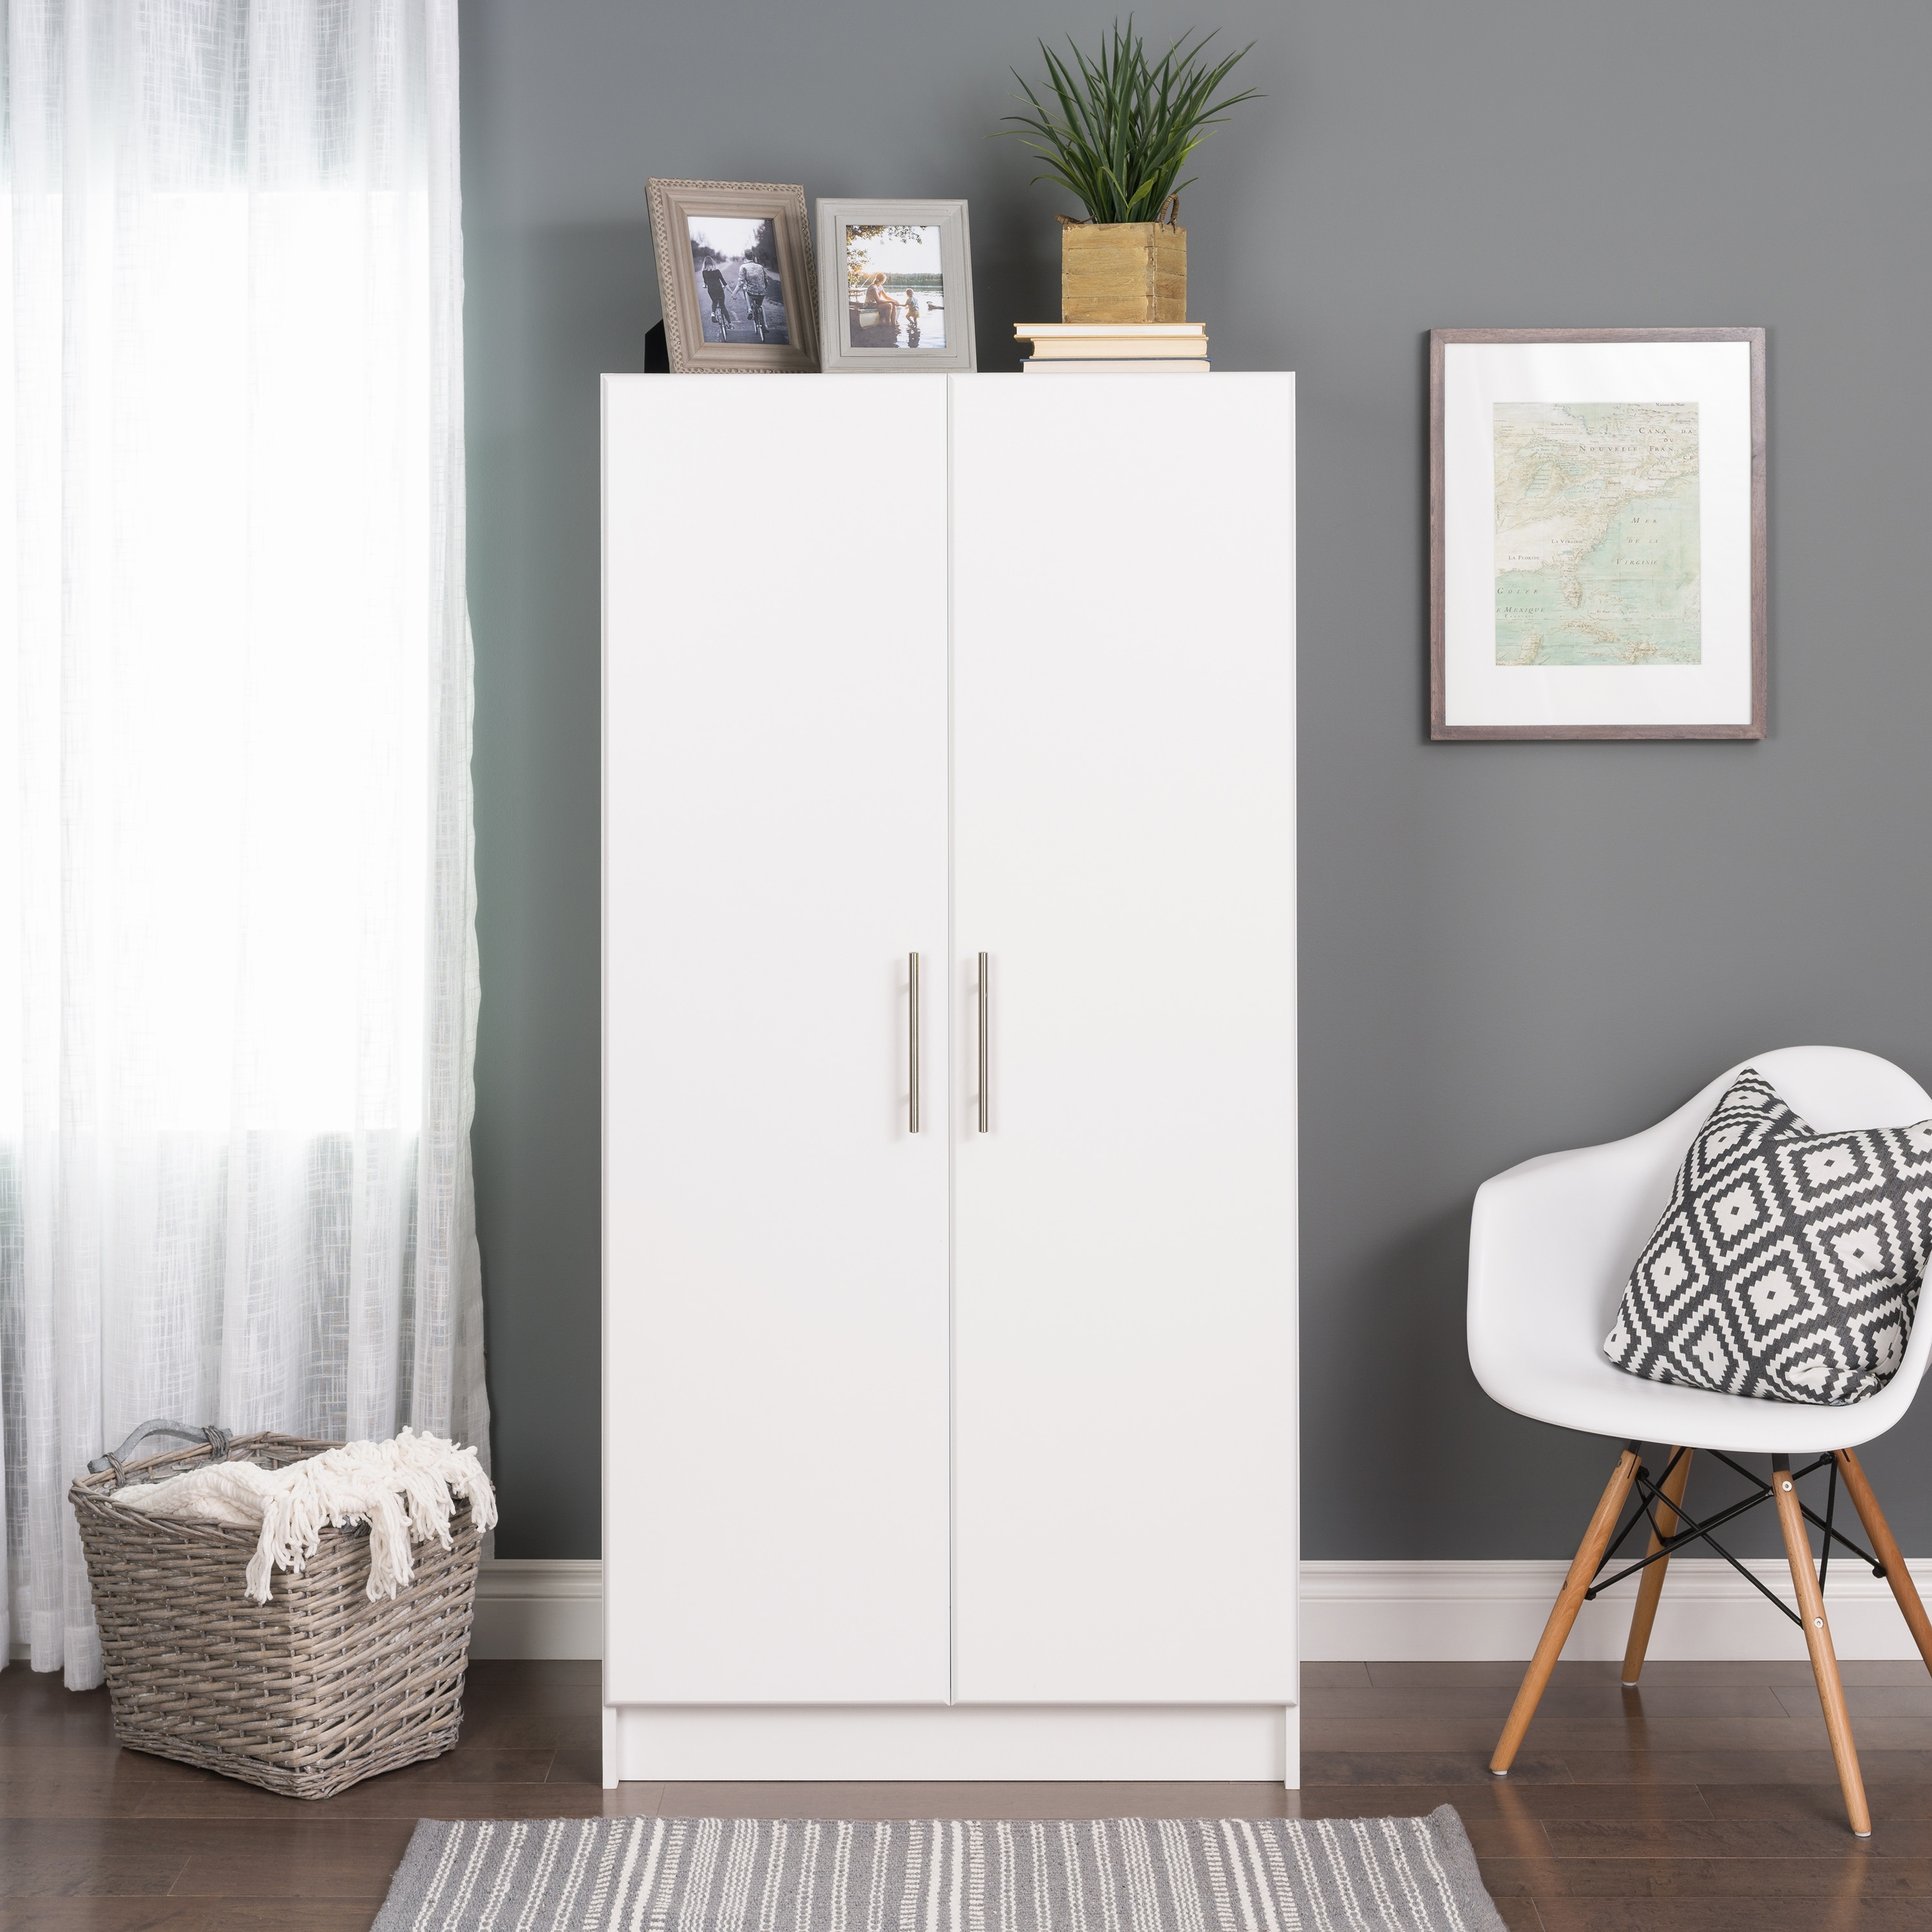 https://ak1.ostkcdn.com/images/products/is/images/direct/8e0c8a1e4c693b712437a20e0227335ca639853a/Prepac-Elite-32-inch-Wardrobe-Cabinet.jpg